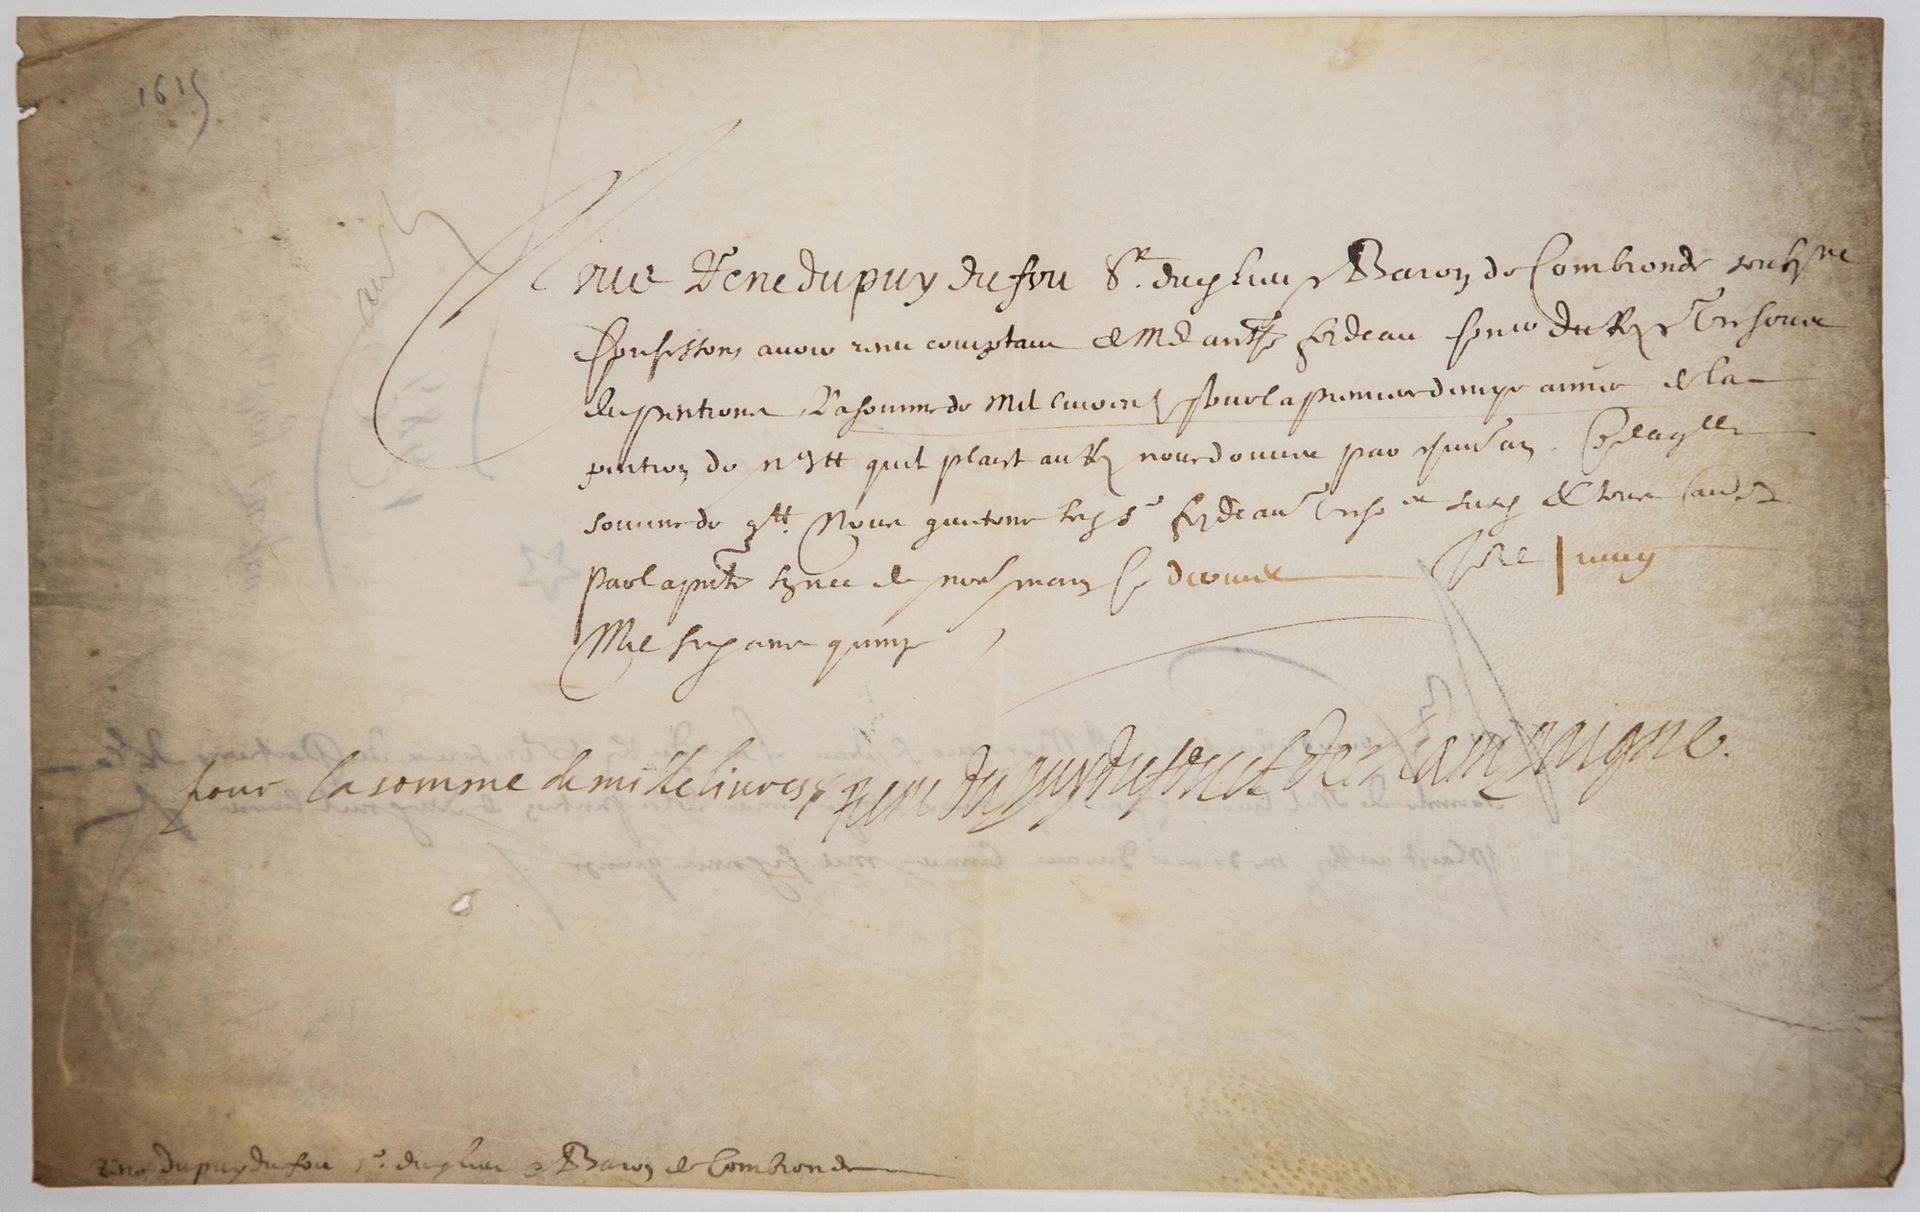 PUY DU FOU. 1615. Signed document, on vellum, from René du PUY DU FOU, Lord of t&hellip;